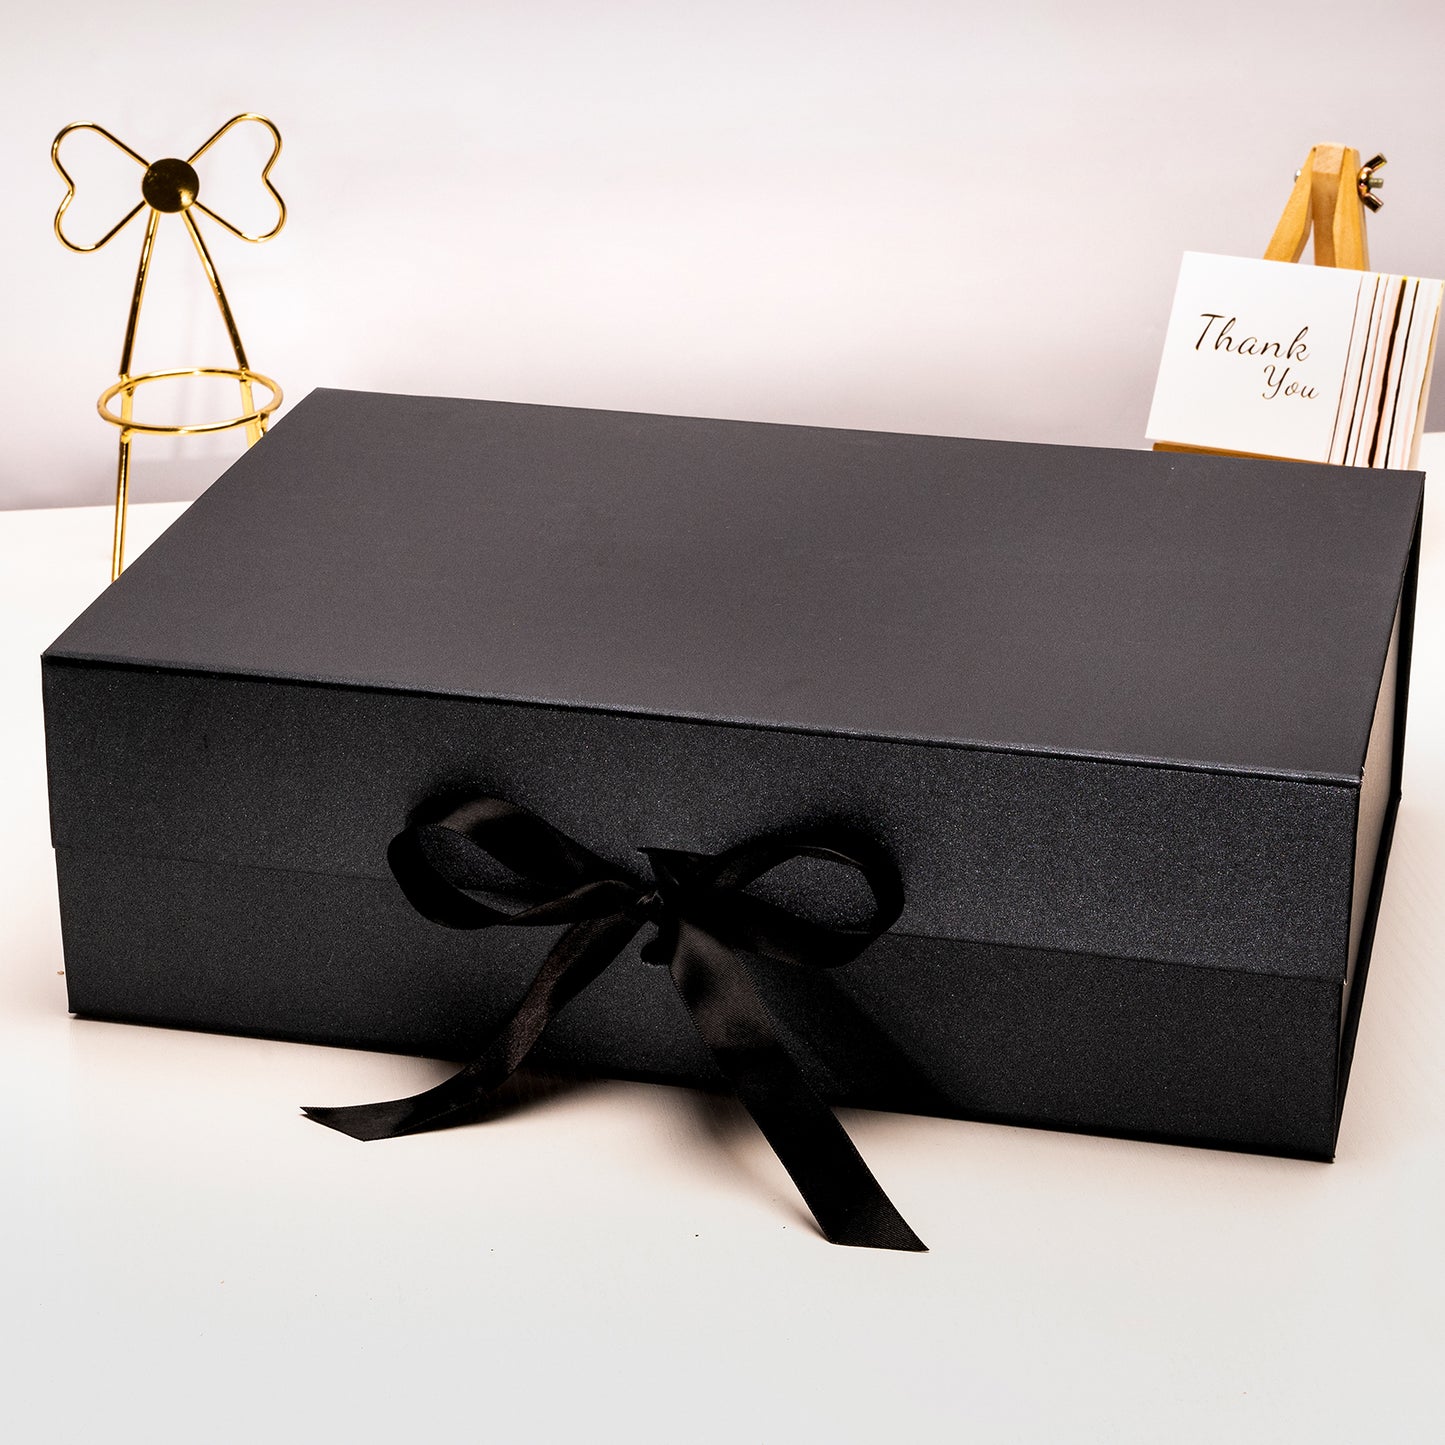 WRAPLA Black Gift Box with Satin Ribbon, 35X23X10CM Collapsible Gift Box with Magnetic Closure for Party, Wedding, Gift Wrap, Bridesmaid Proposal, Storage